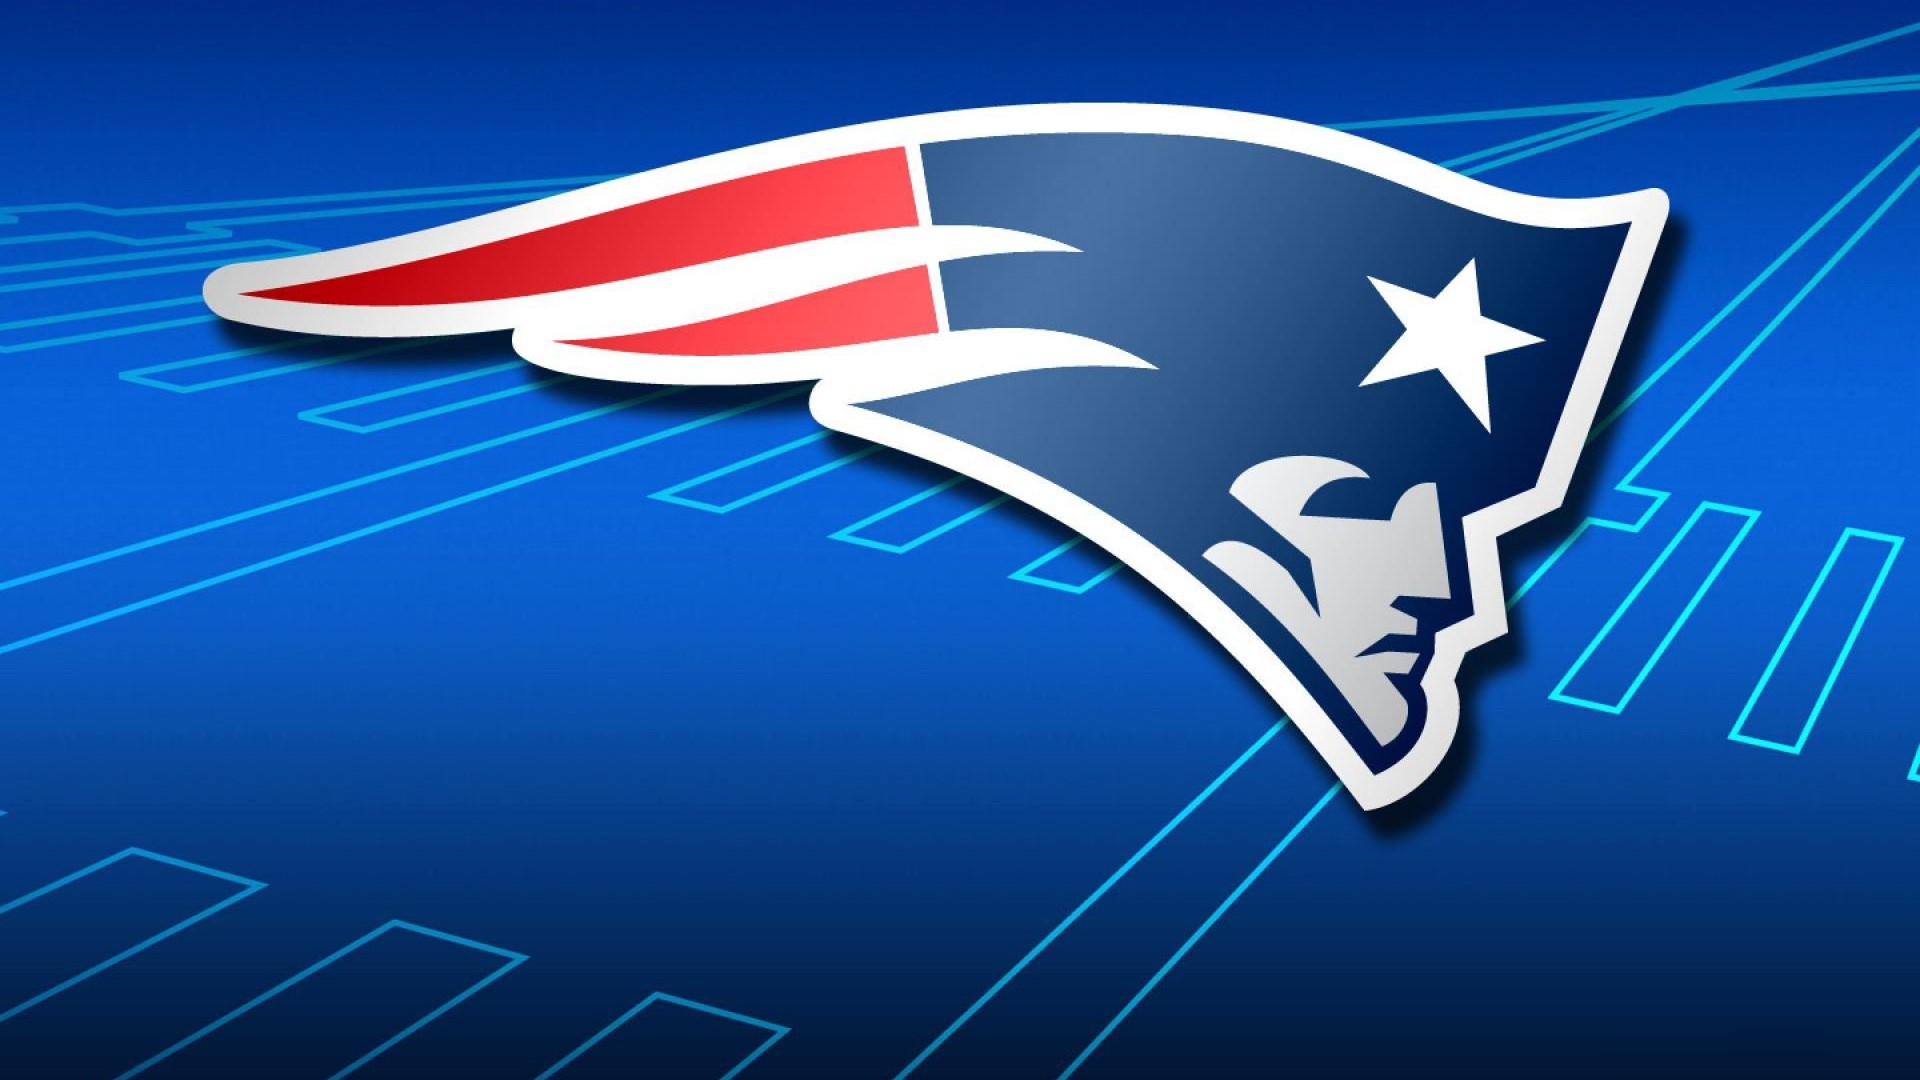 NE Patriots HD Wallpapers With Resolution 1920X1080 pixel. You can make this wallpaper for your Mac or Windows Desktop Background, iPhone, Android or Tablet and another Smartphone device for free